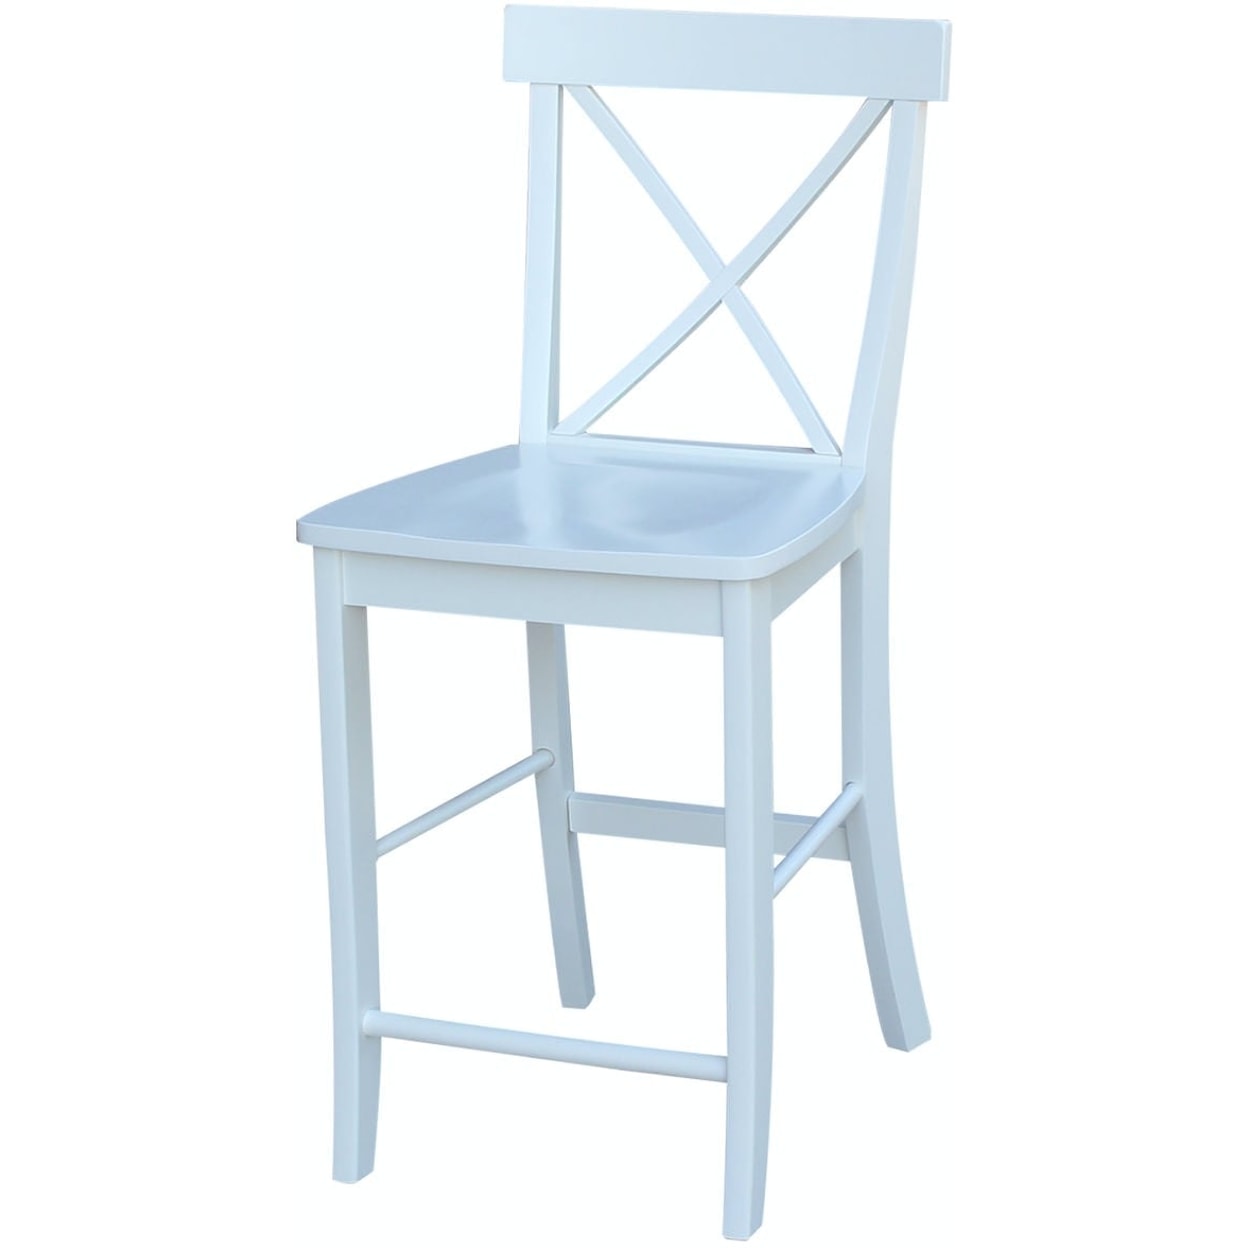 John Thomas Dining Essentials X-Back Stool in Pure White